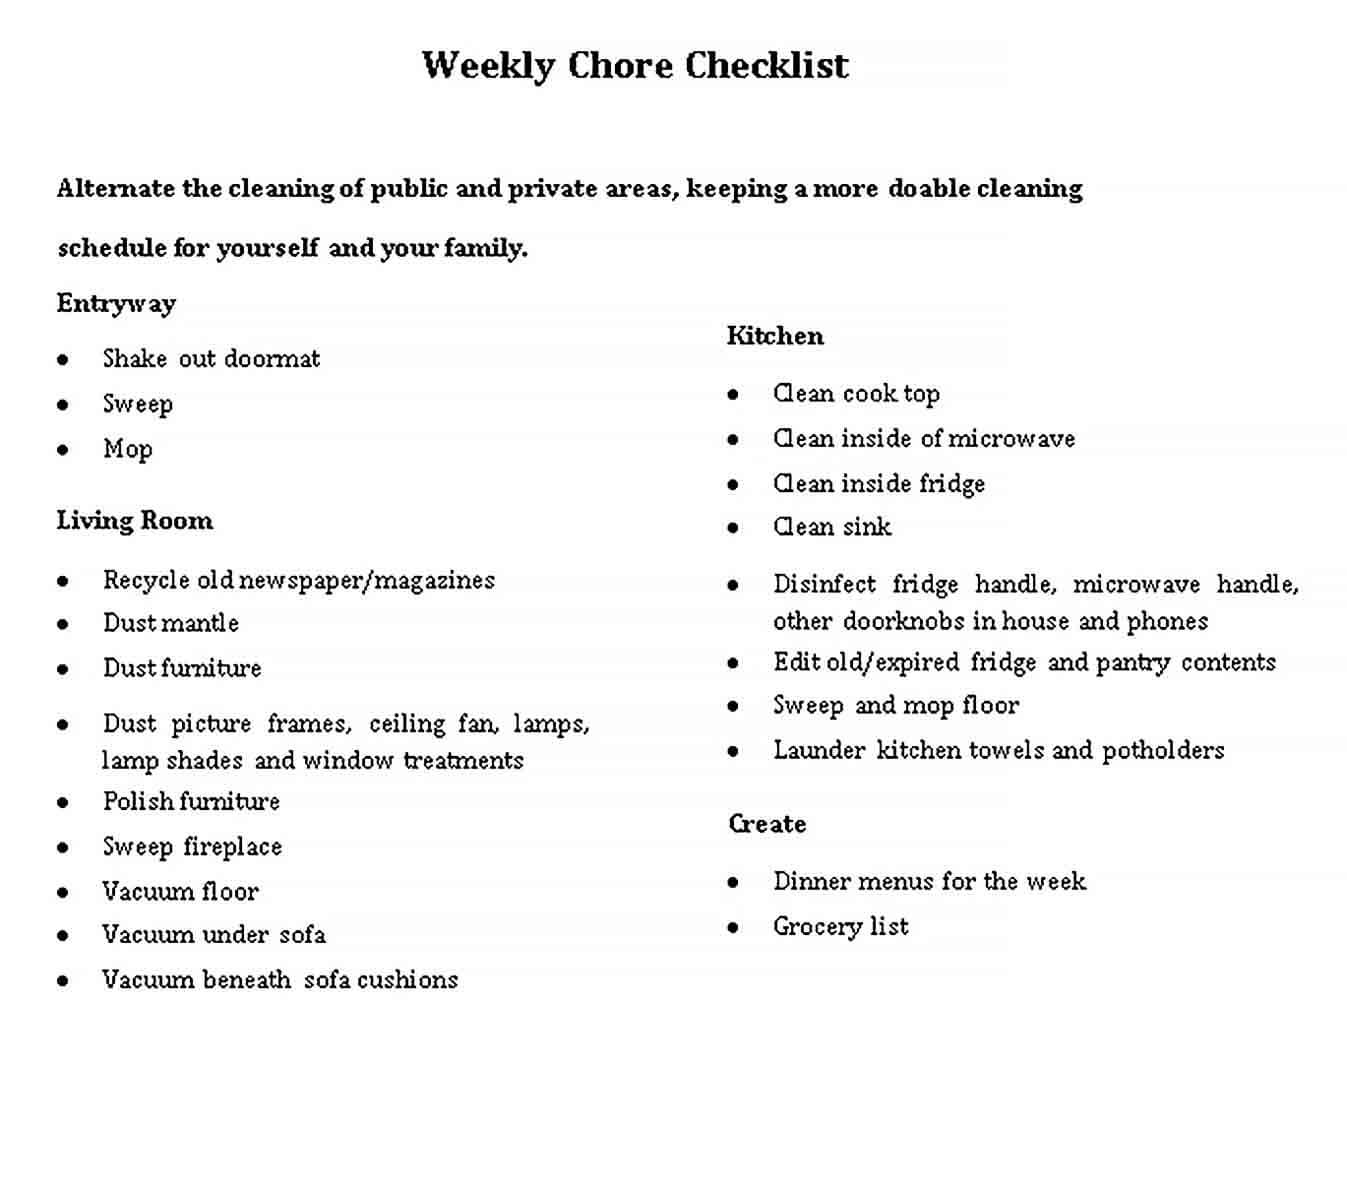 Sample Weekly Chore Checklist Template